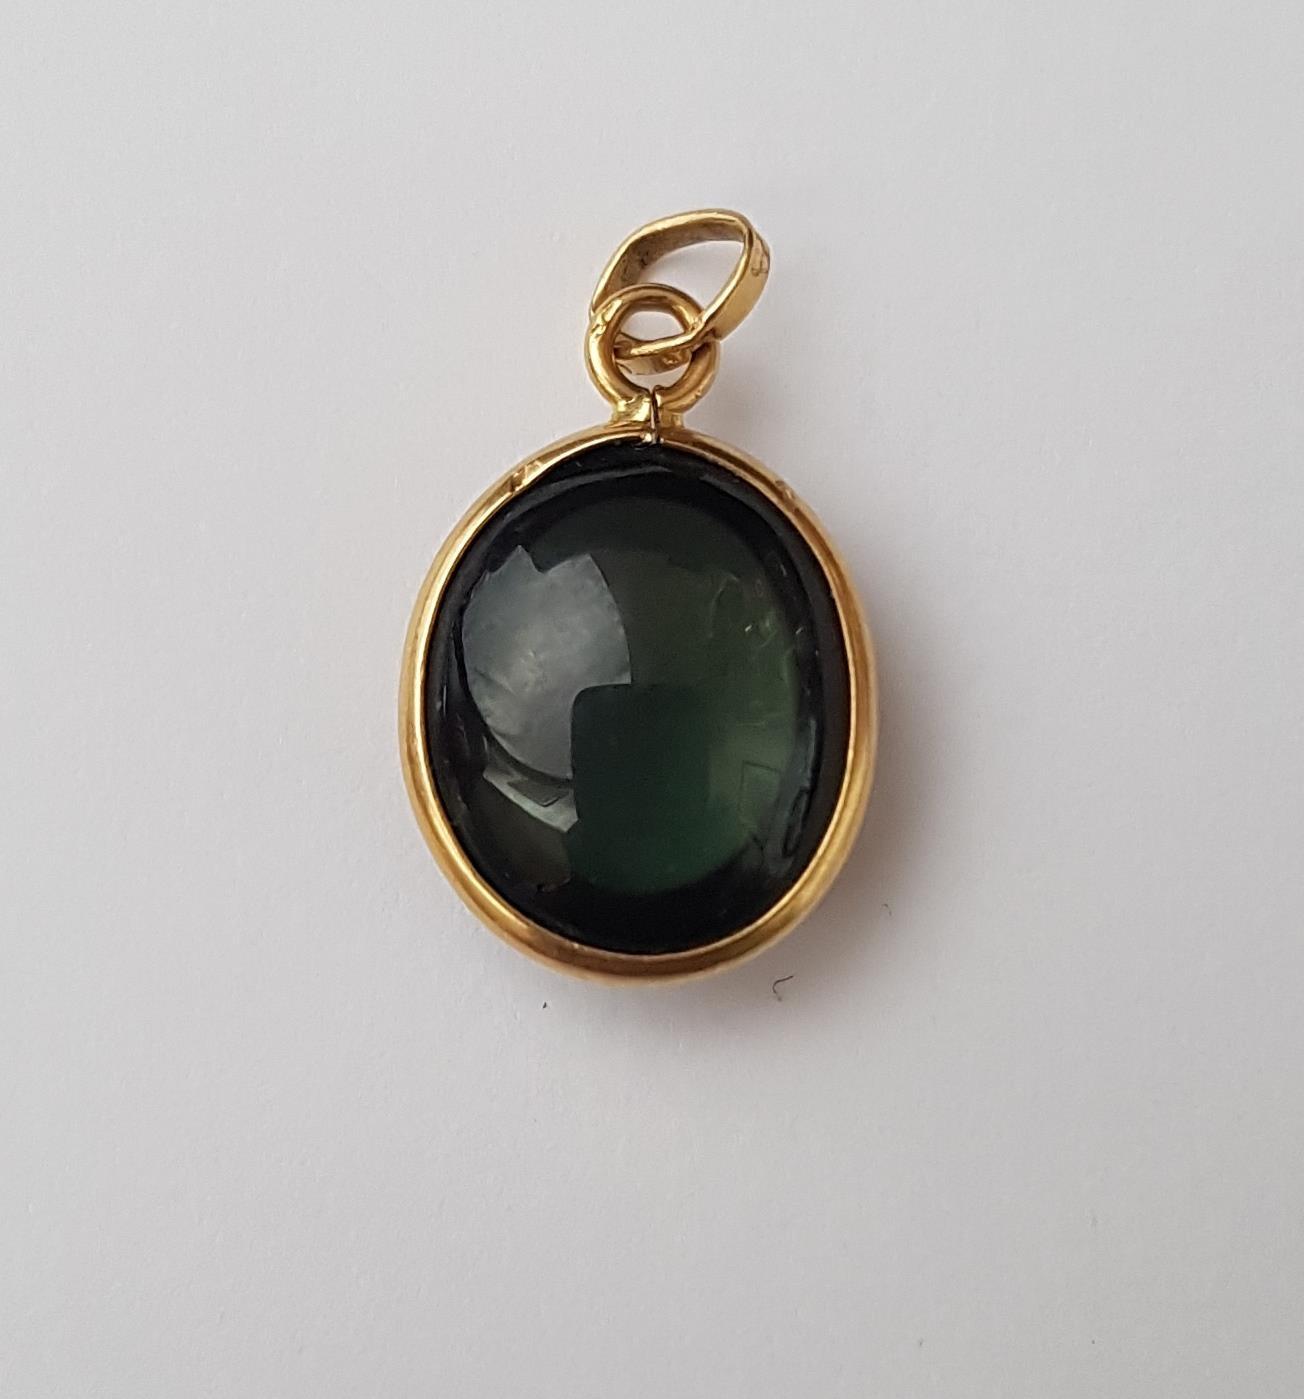 FULL ROUNDED CABOCHON TOURMALINE PENDANT in nine carat gold mount, 1.9cm high (including